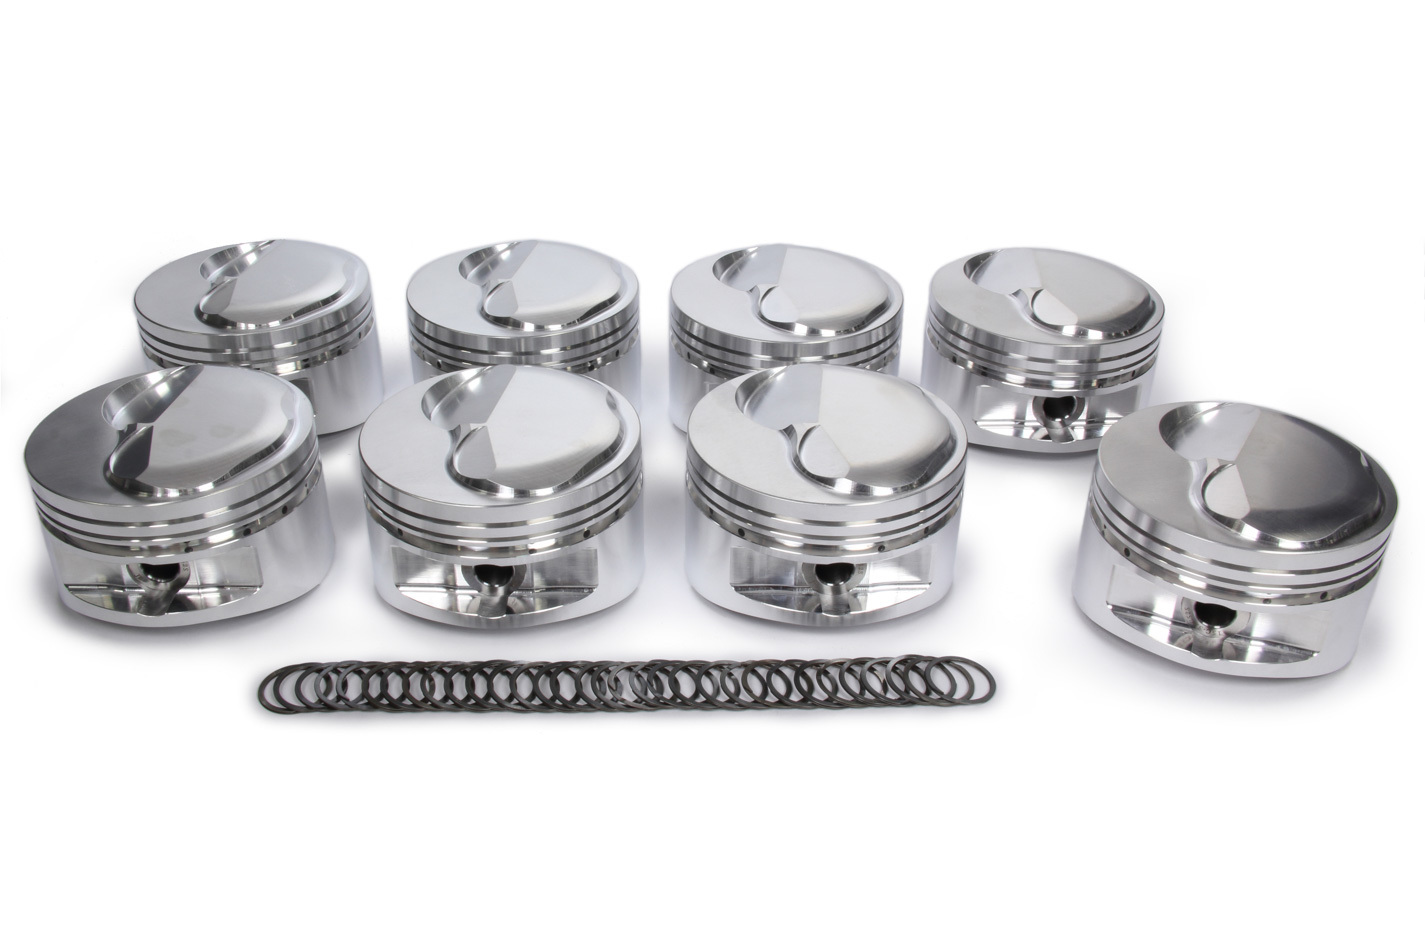 JE Pistons 297814 Piston, 541 Inverted Dome, Forged Aluminum, 4.500 in Bore, 0.017 x 1/16 x 3/16 in Ring Grooves, Plus 25.30 cc, Wrist Pin Included, Big Block Chevy, Set of 8